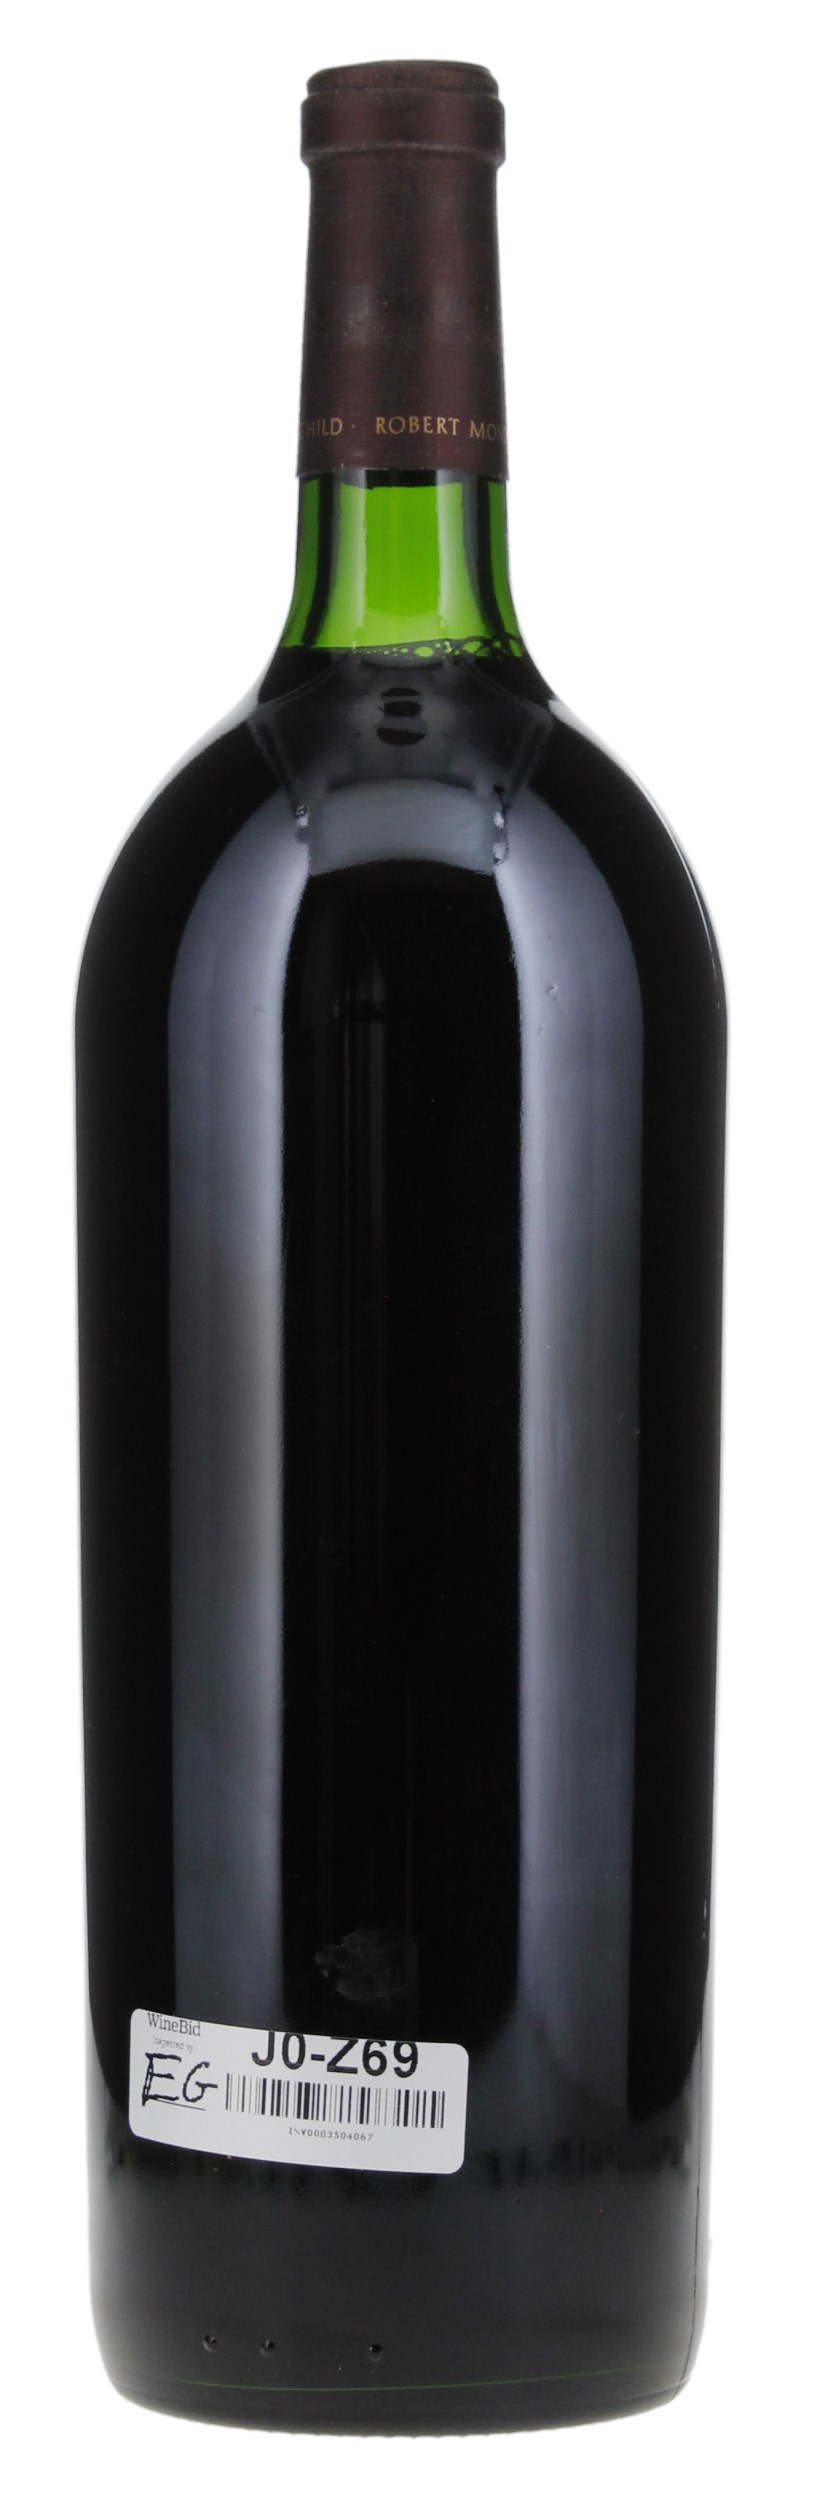 1987 Opus One, 1.5ltr